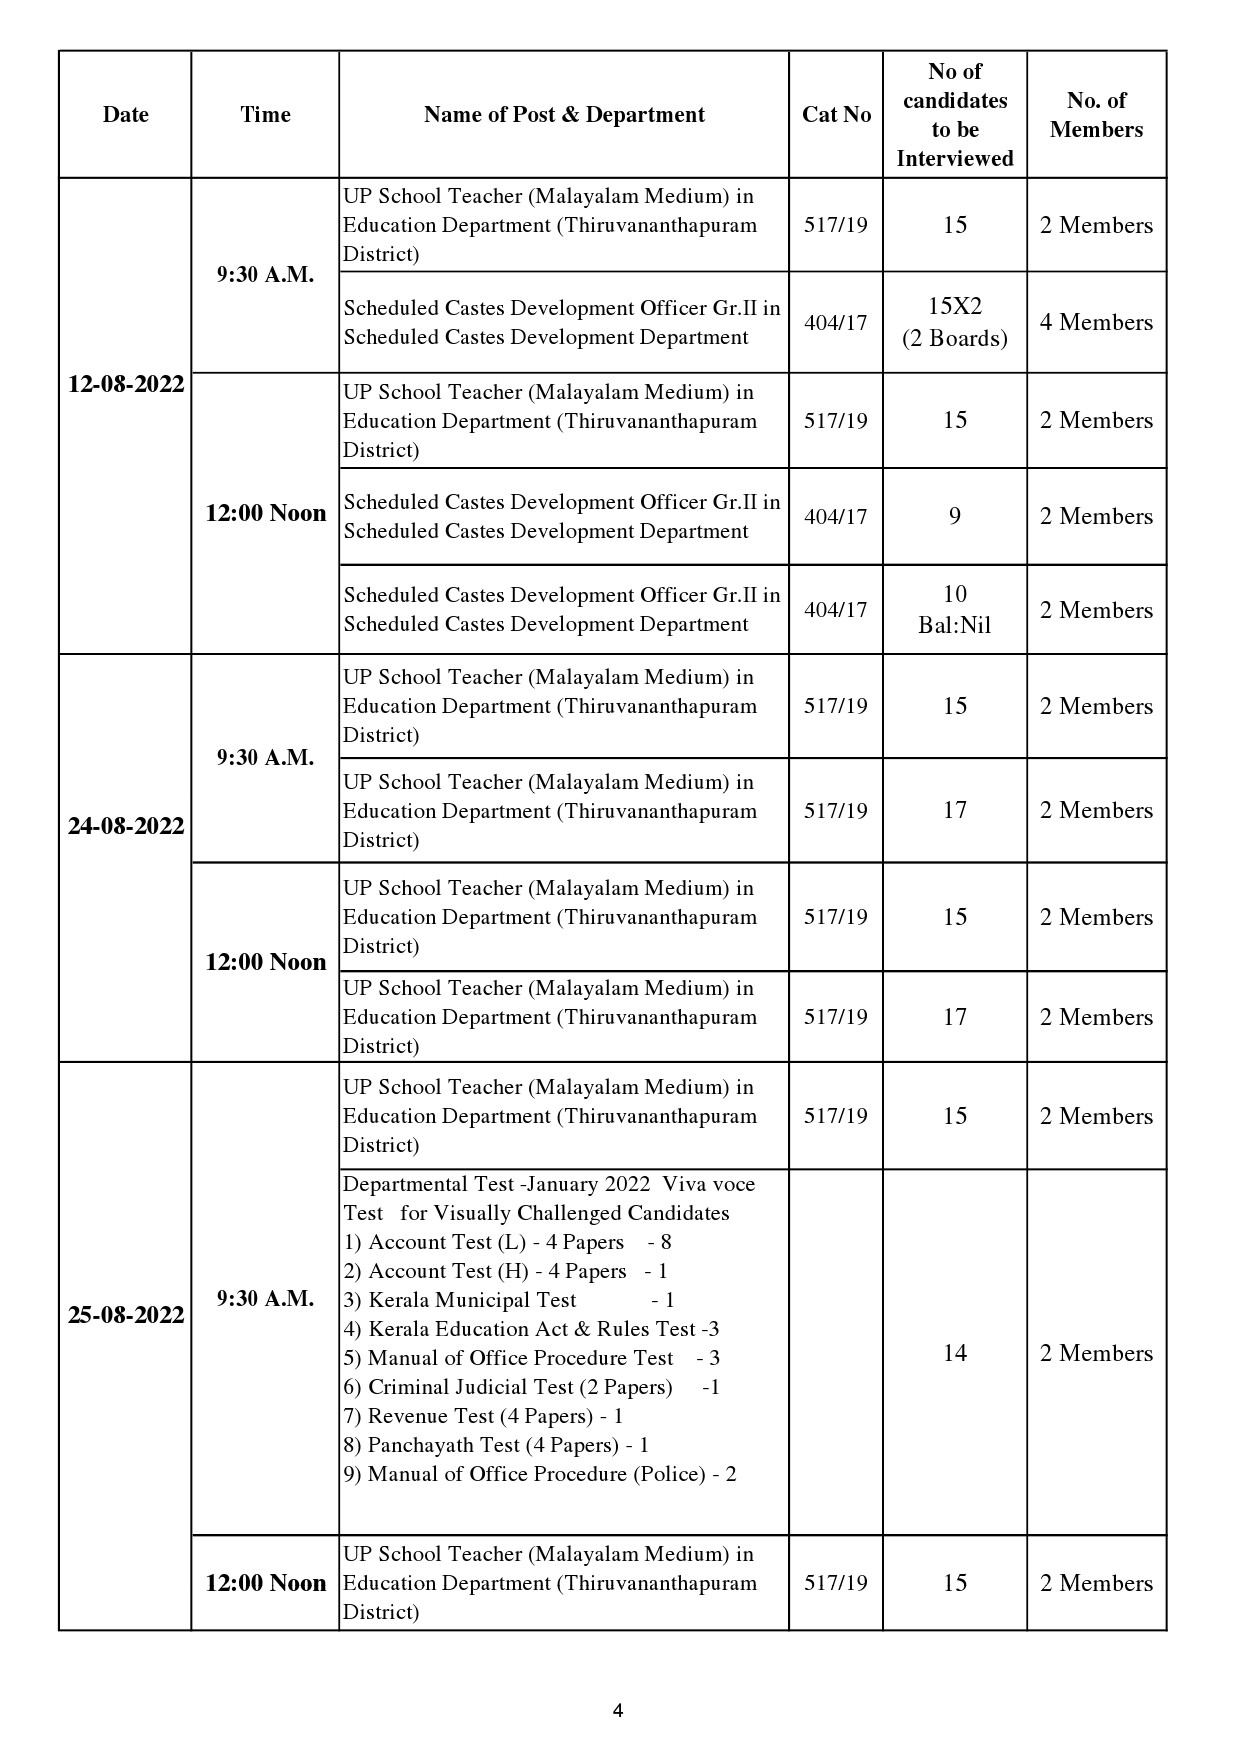 Interview Programme For The Month Of August 2022 - Notification Image 4